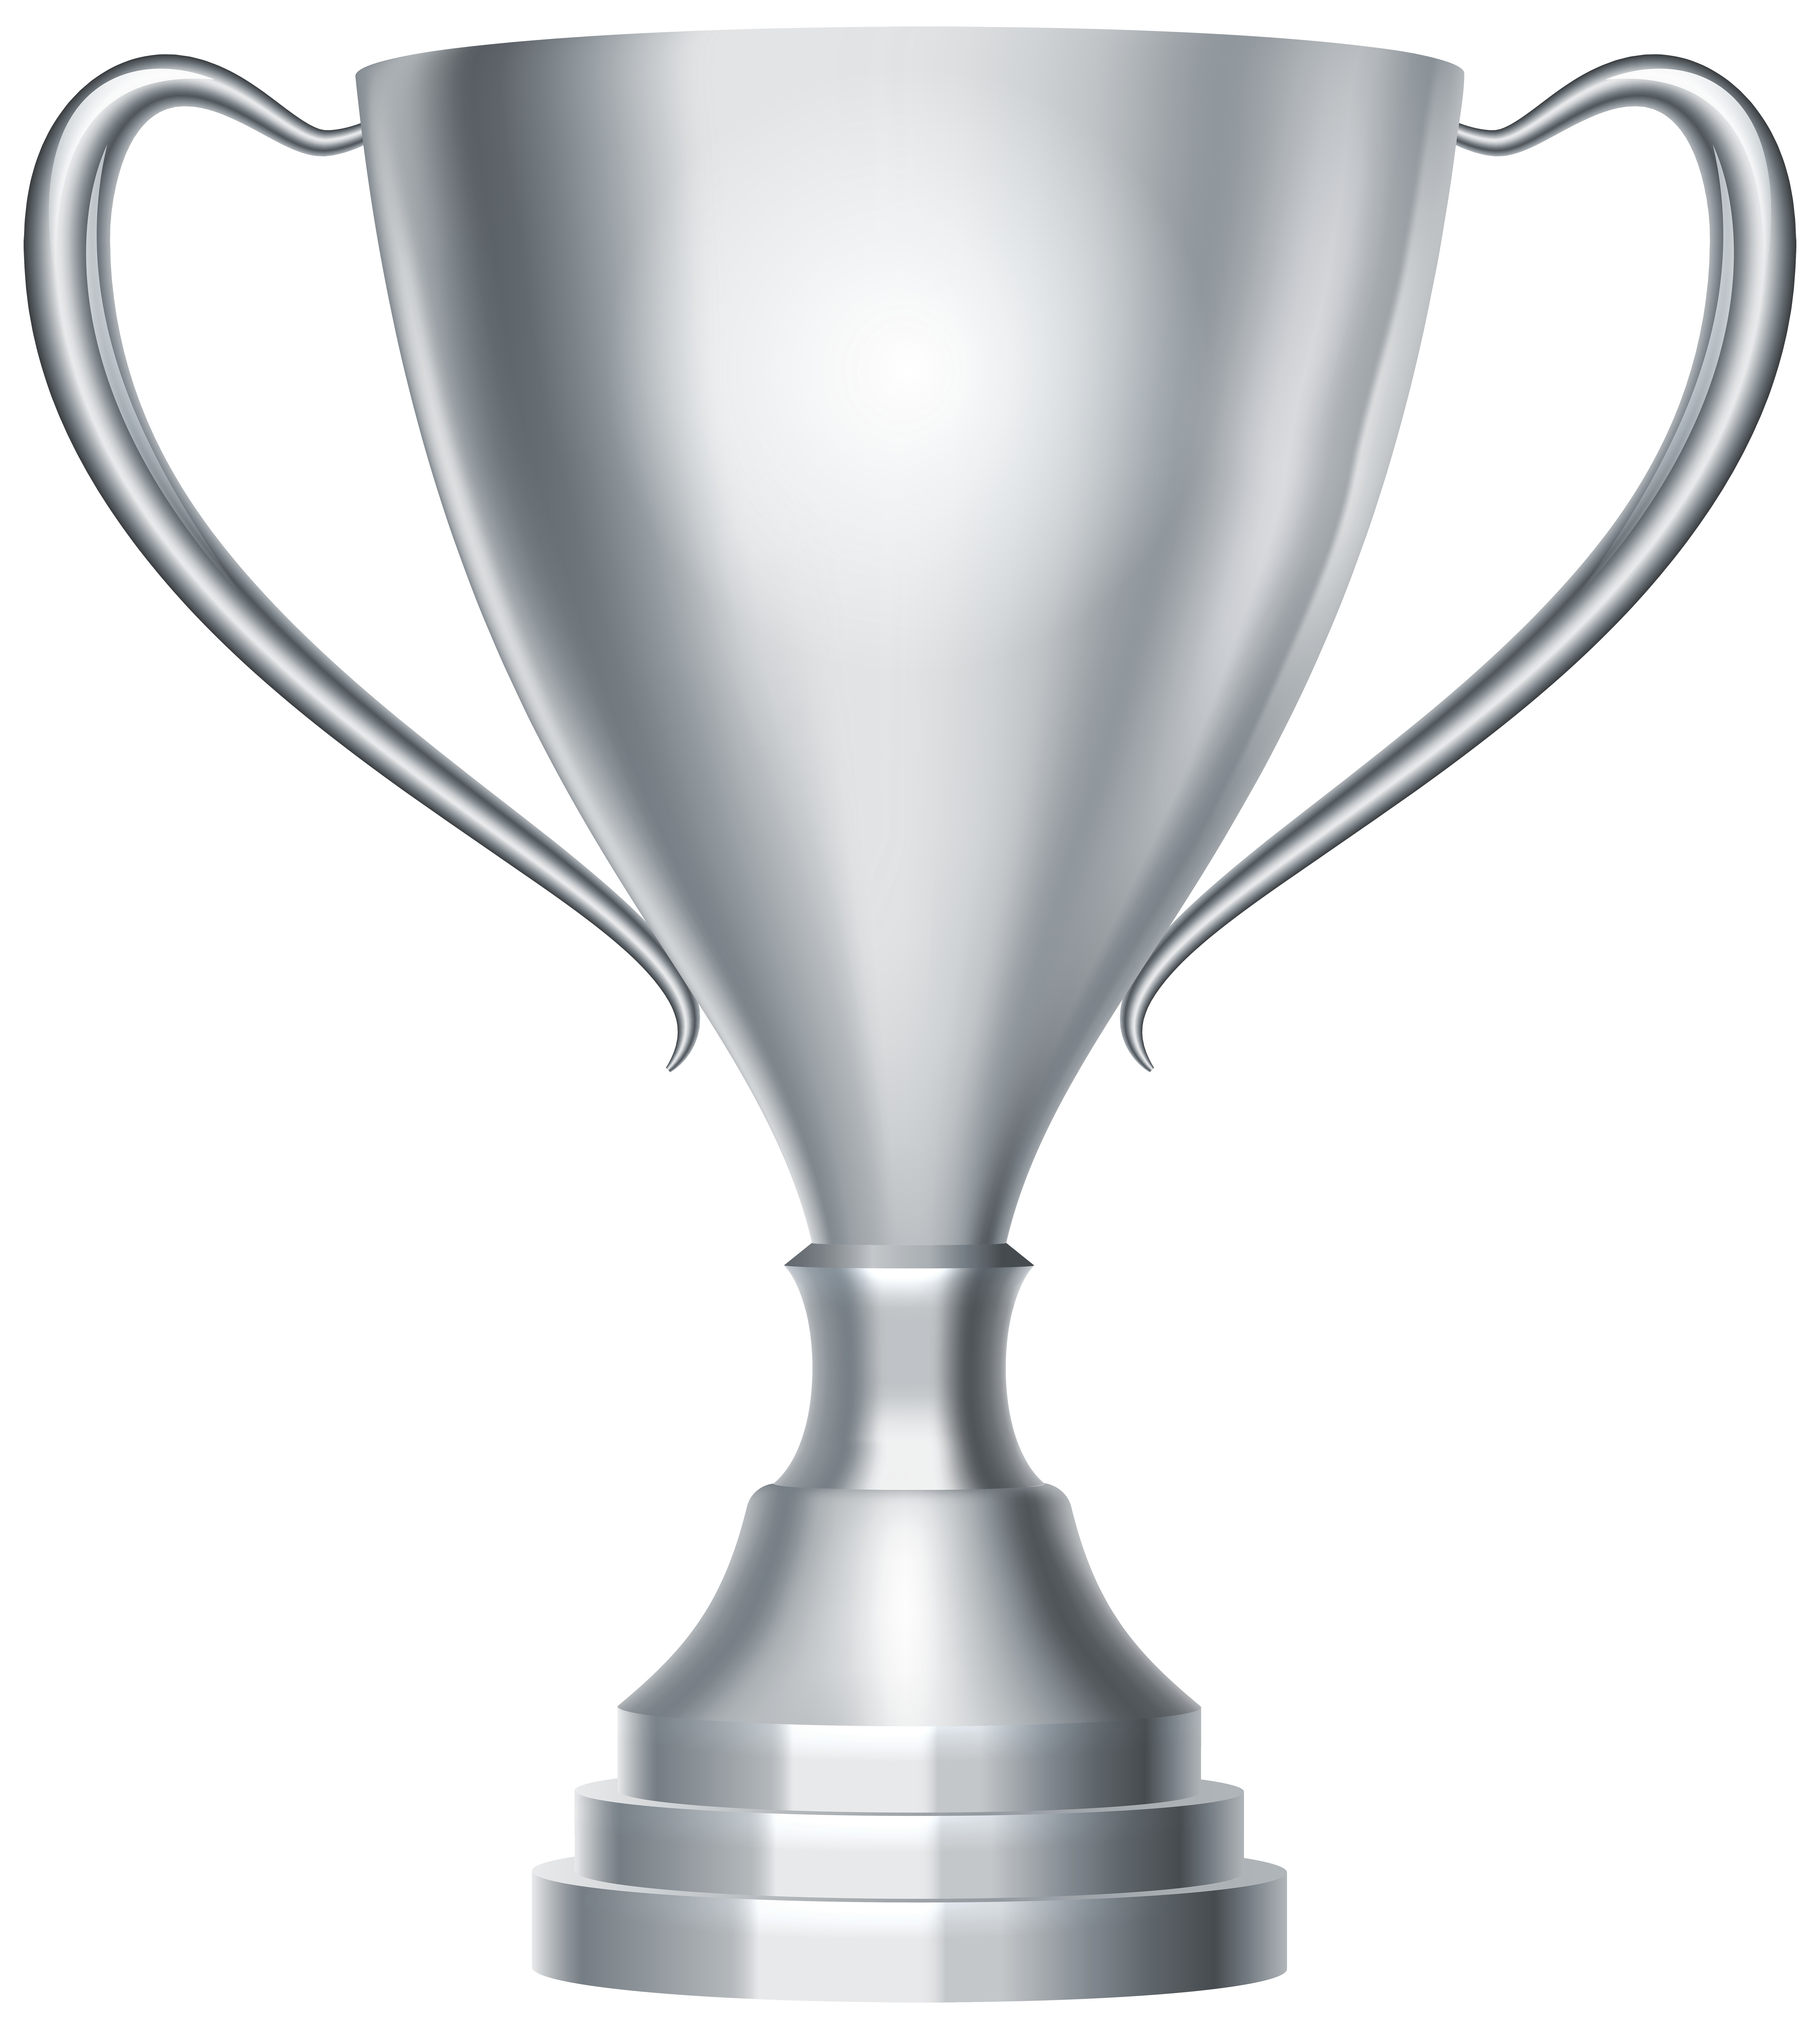 Silver Trophy Cup Award Transparent PNG Clip Art Image​ | Gallery  Yopriceville - High-Quality Free Images and Transparent PNG Clipart